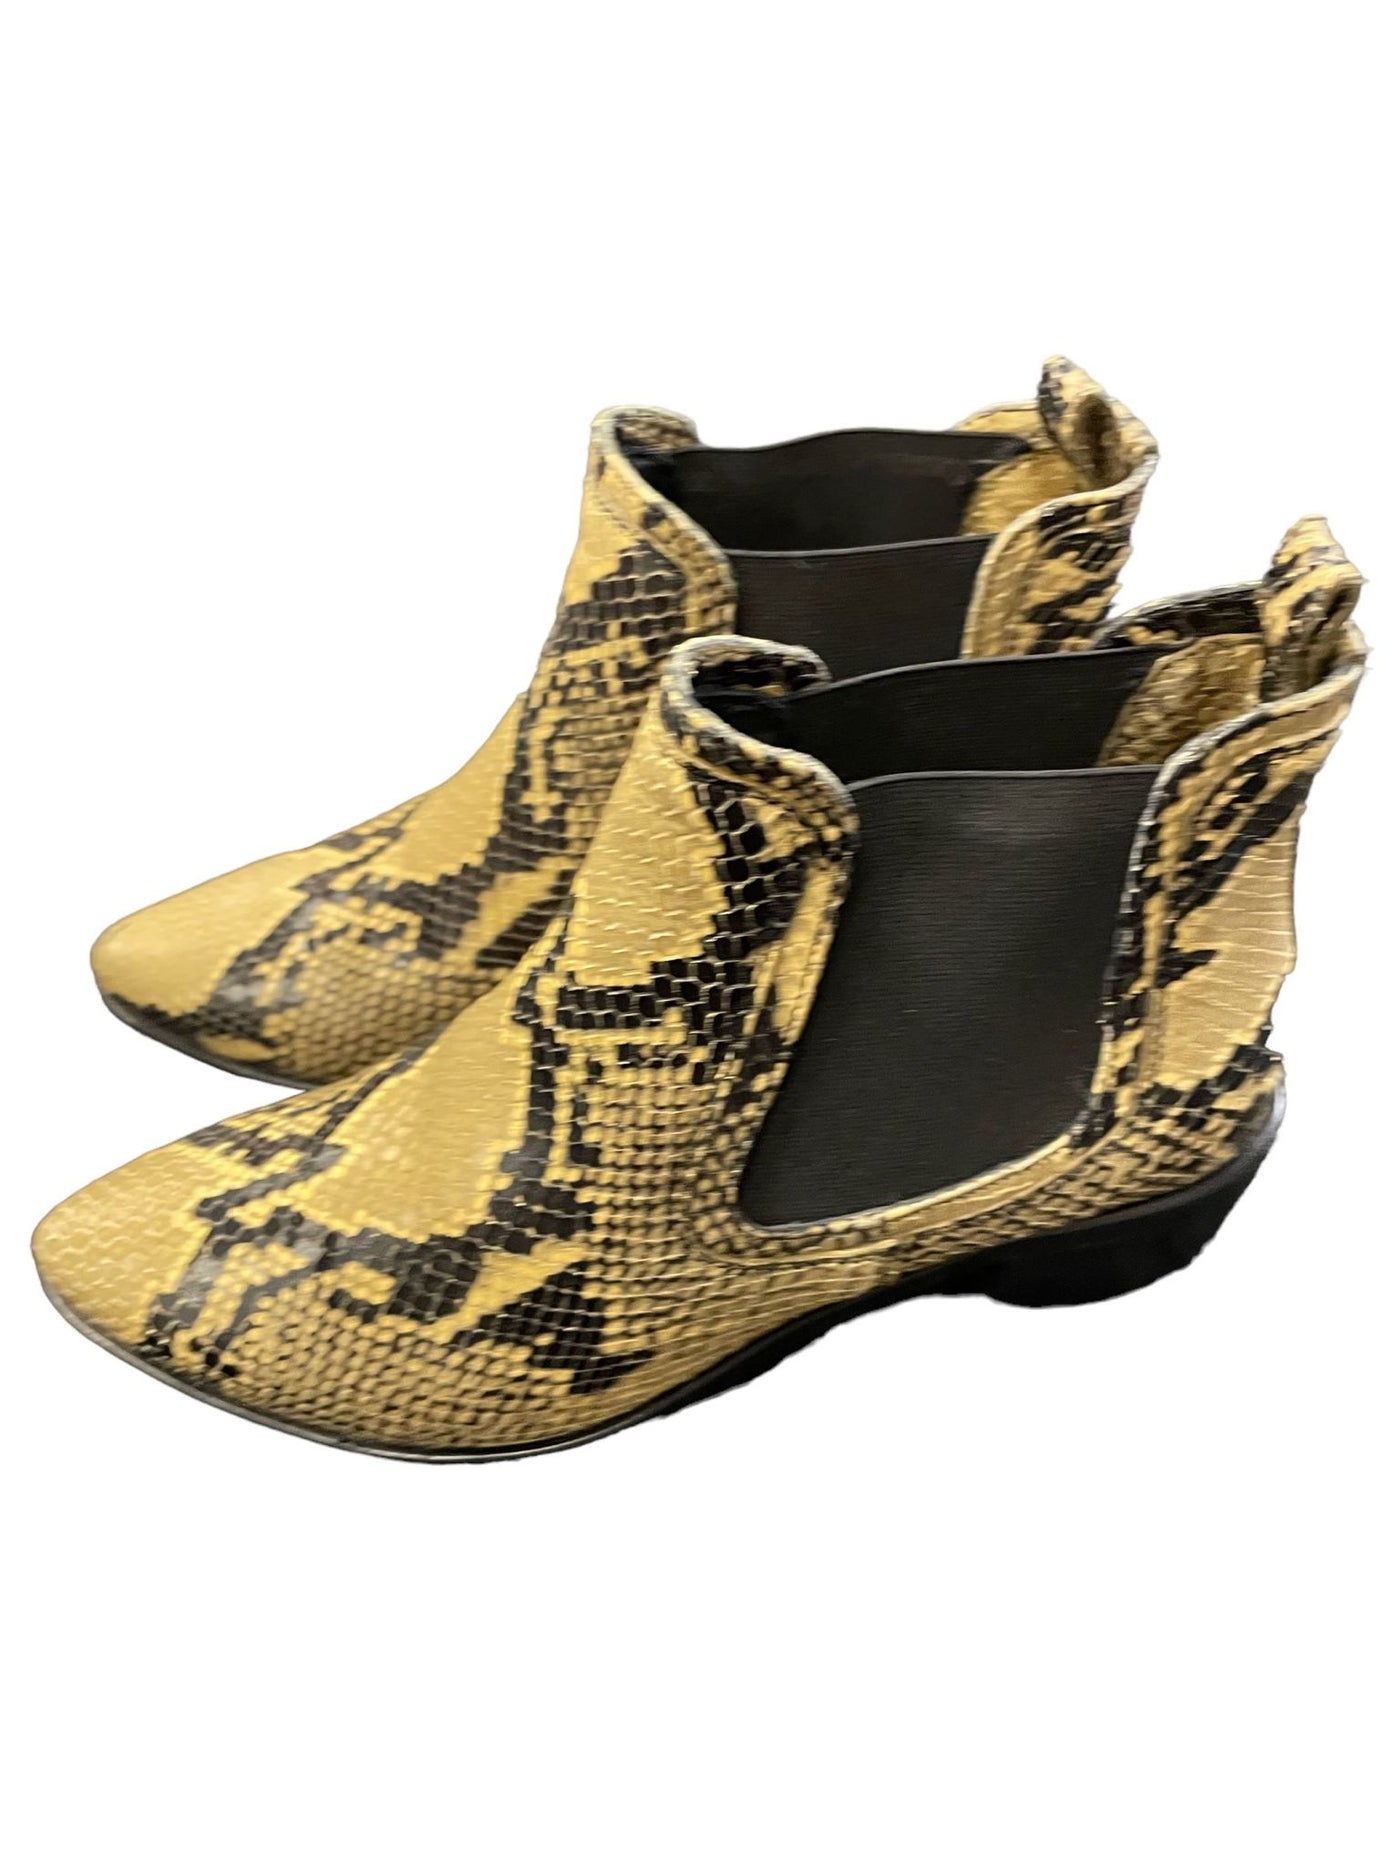 Belstaff reptile ankle boot size 36